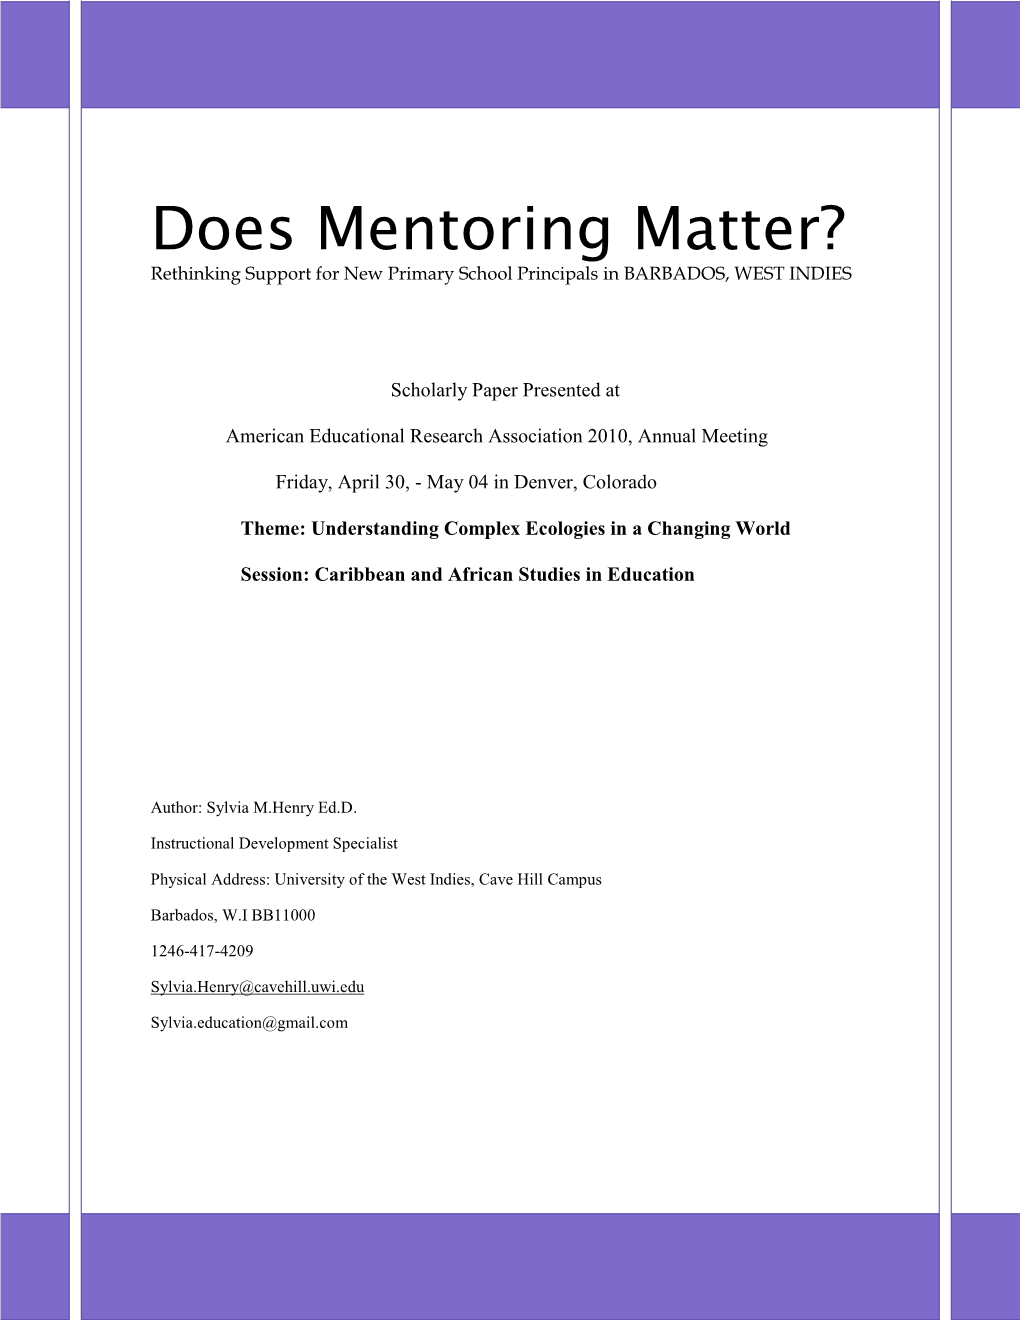 Does Mentoring Matter? Rethinking Support for New Primary School Principals in BARBADOS, WEST INDIES